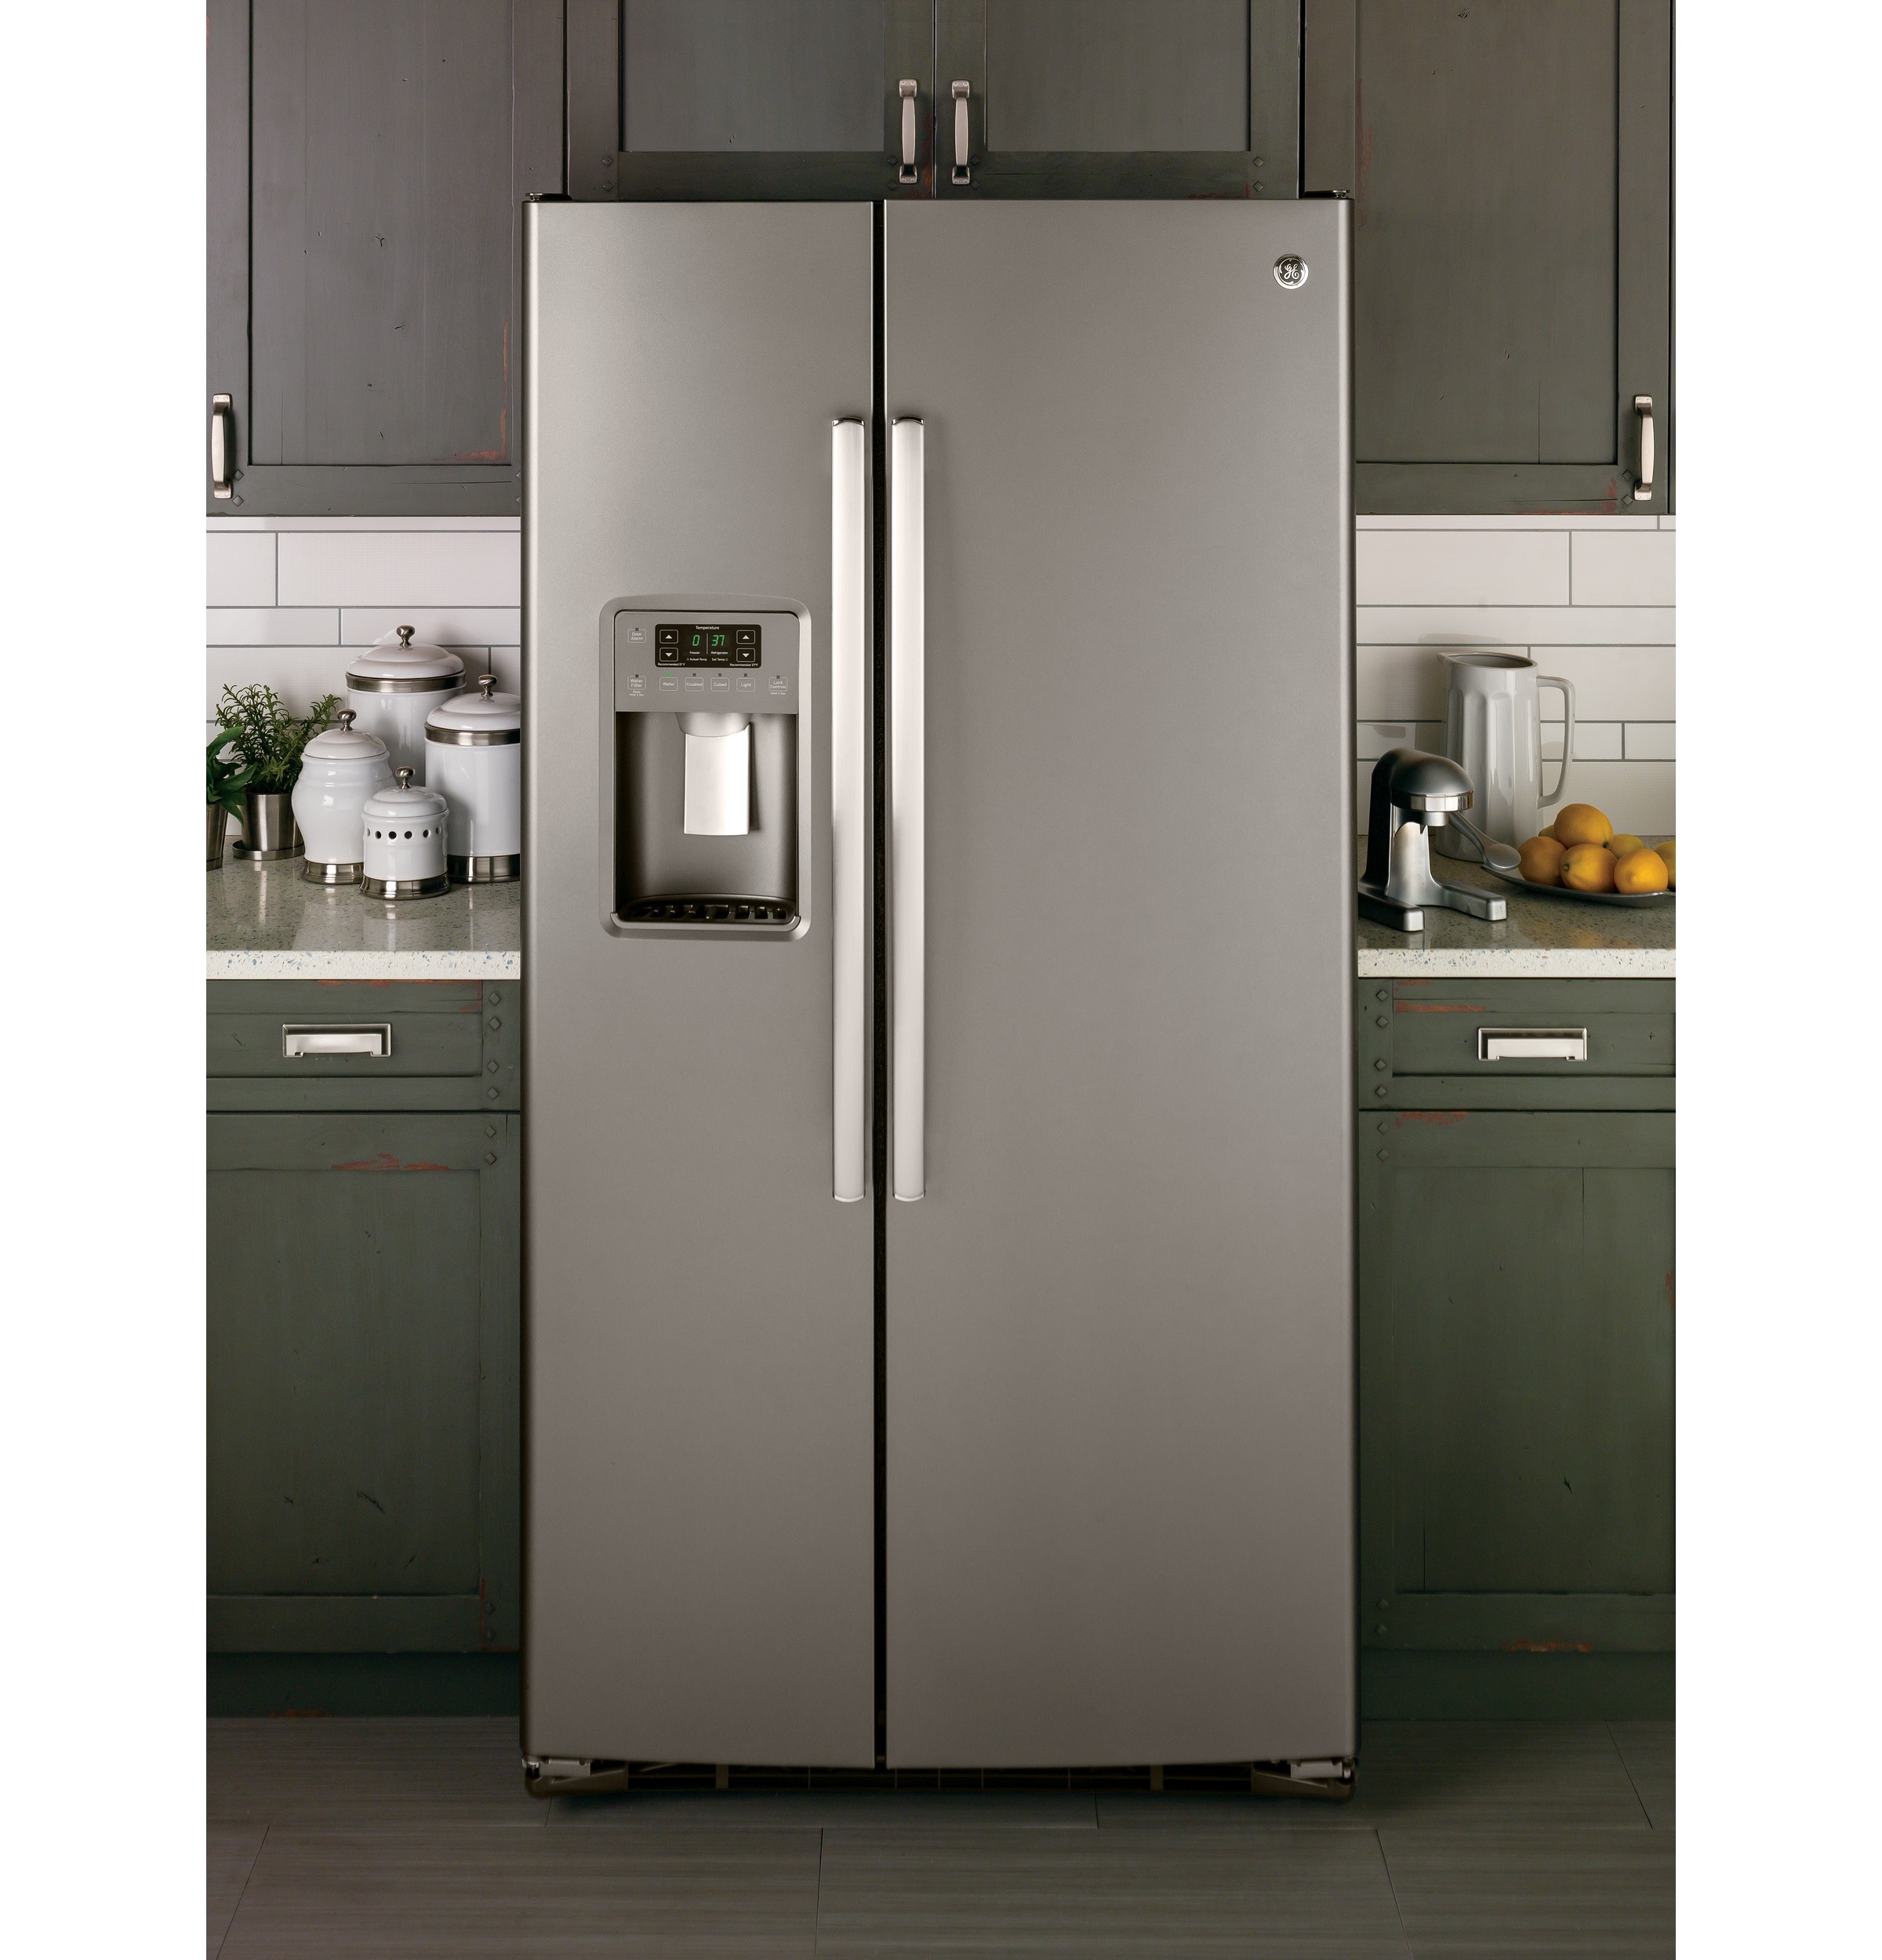 Customer Reviews: GE 23.0 Cu. Ft. Side-by-Side Refrigerator with ...